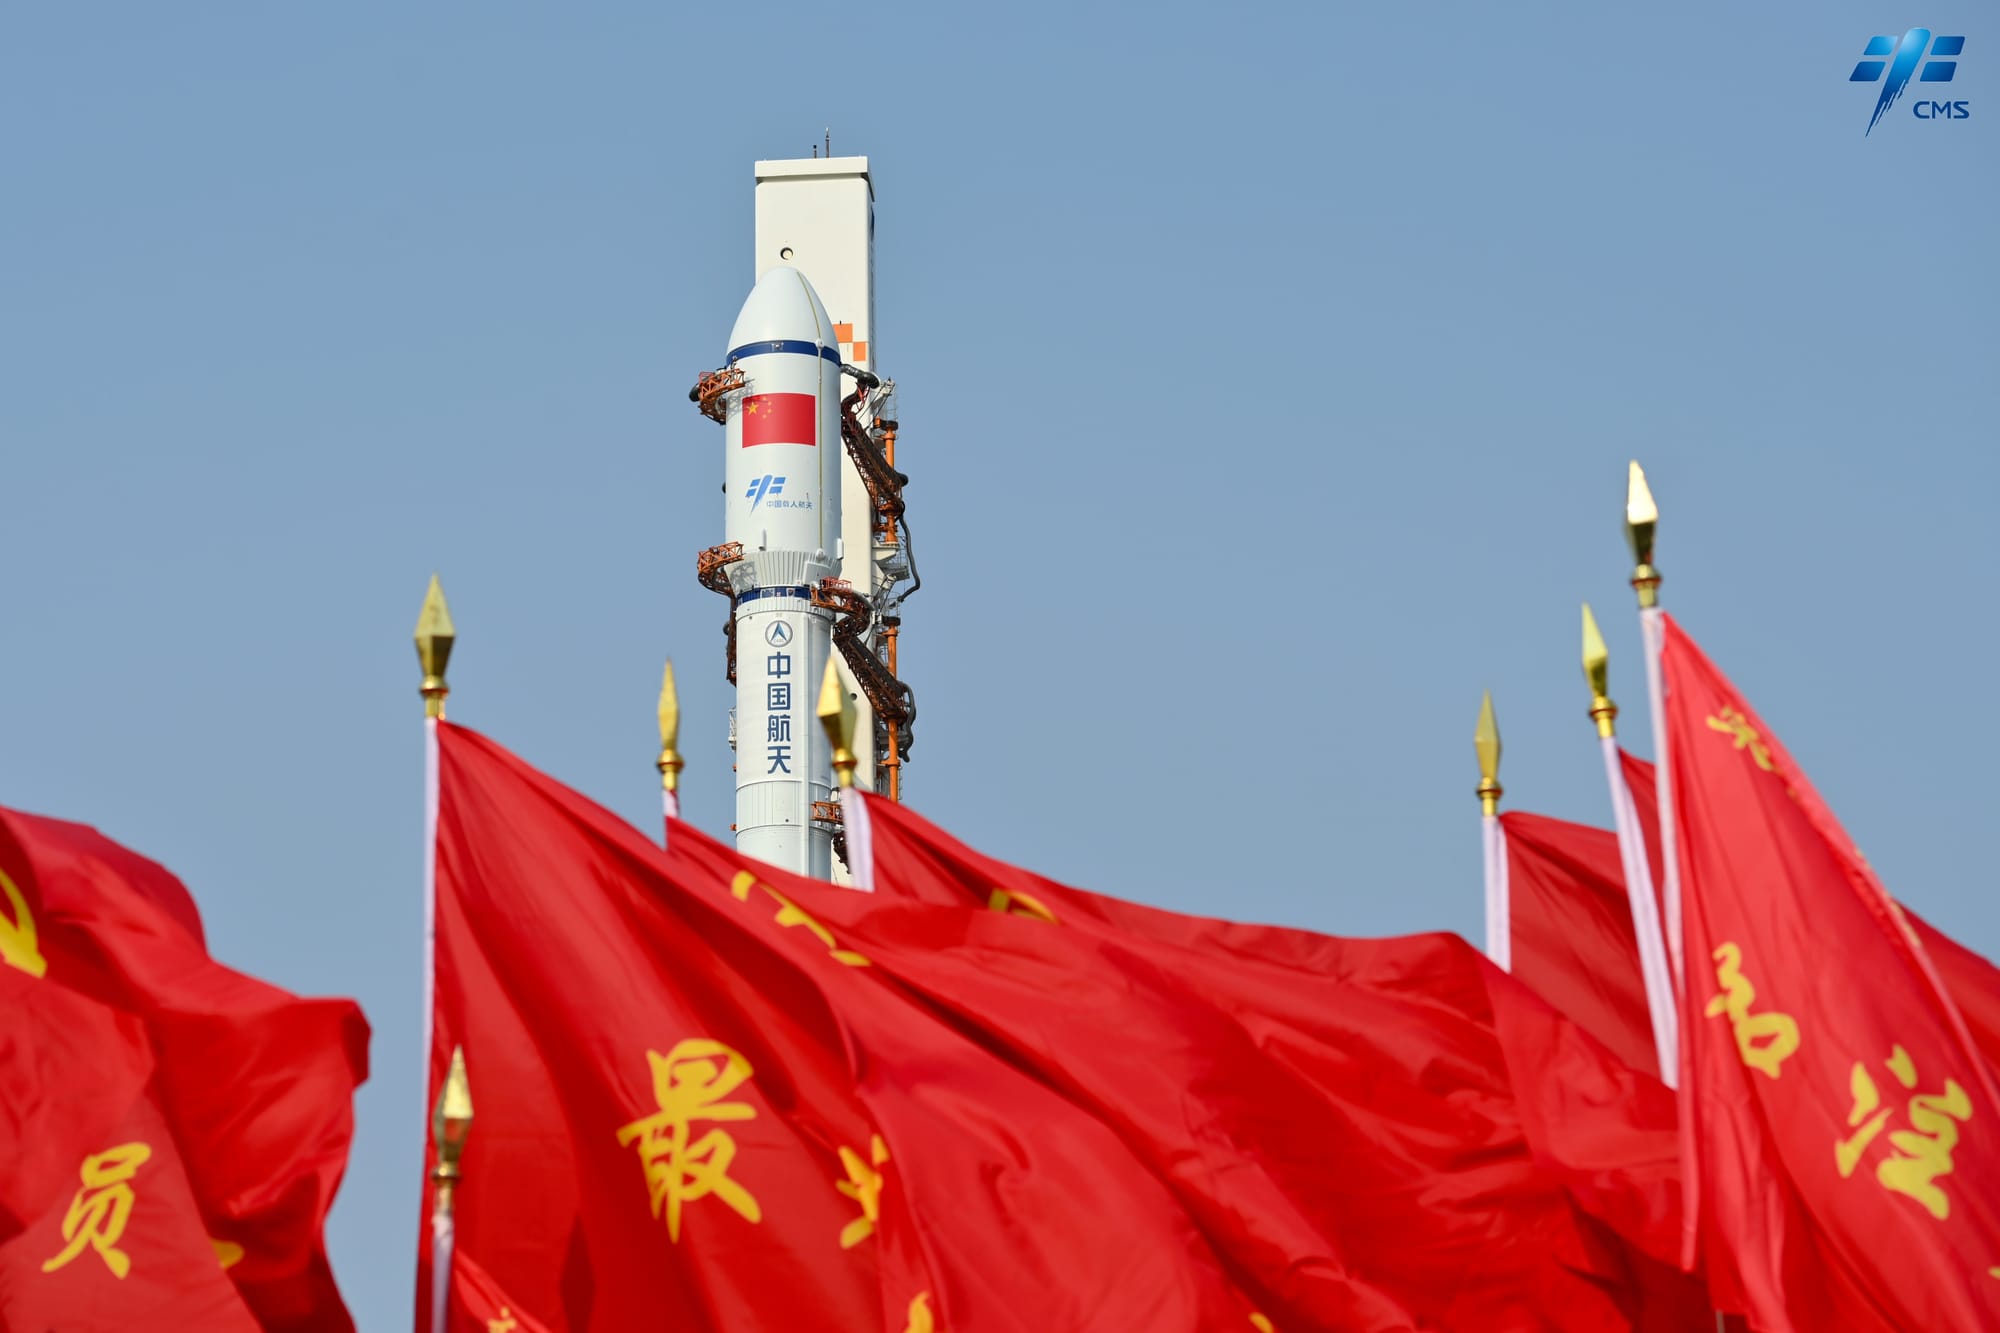 Tianzhou-6 during rollout atop of a Long March 6 before launch. ©China Manned Space Agency